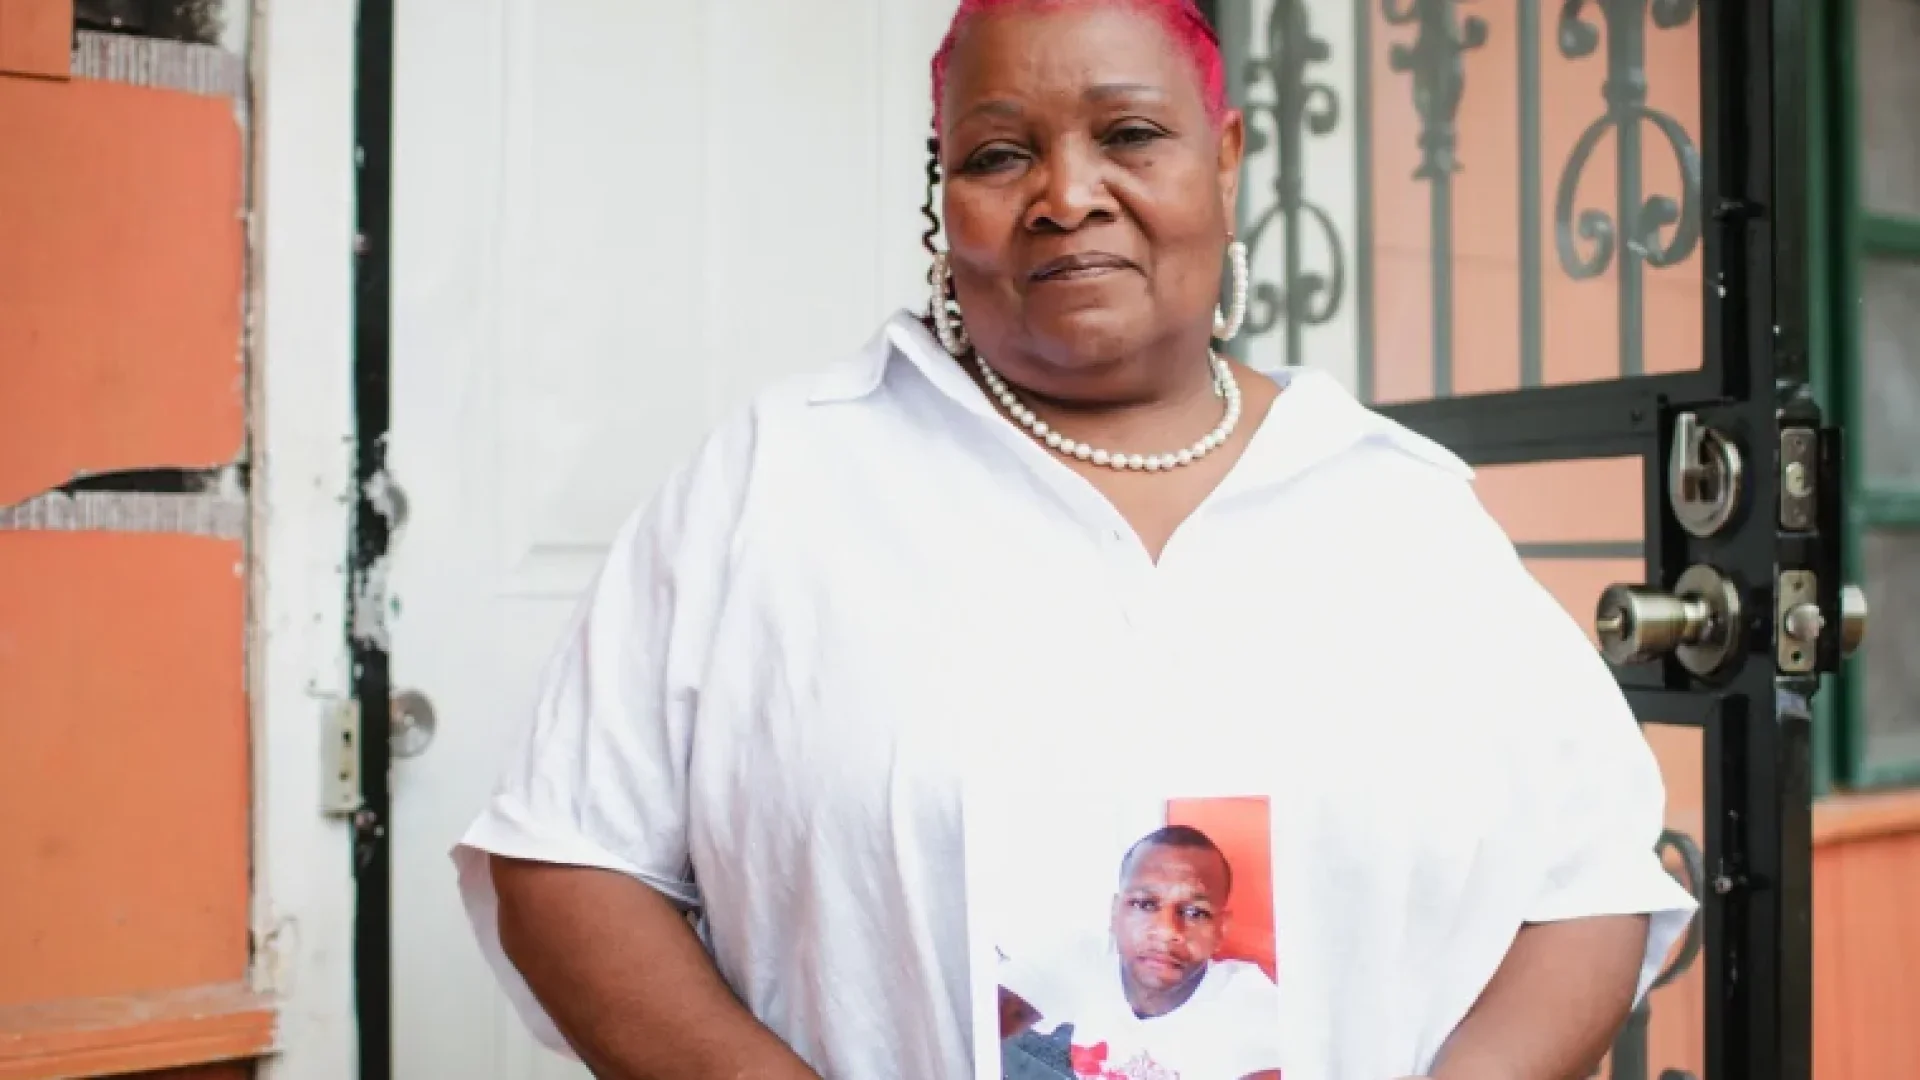 A Black Mom Spent Months Searching For Her Son—She Finally Learned He Was Killed By A Police Officer